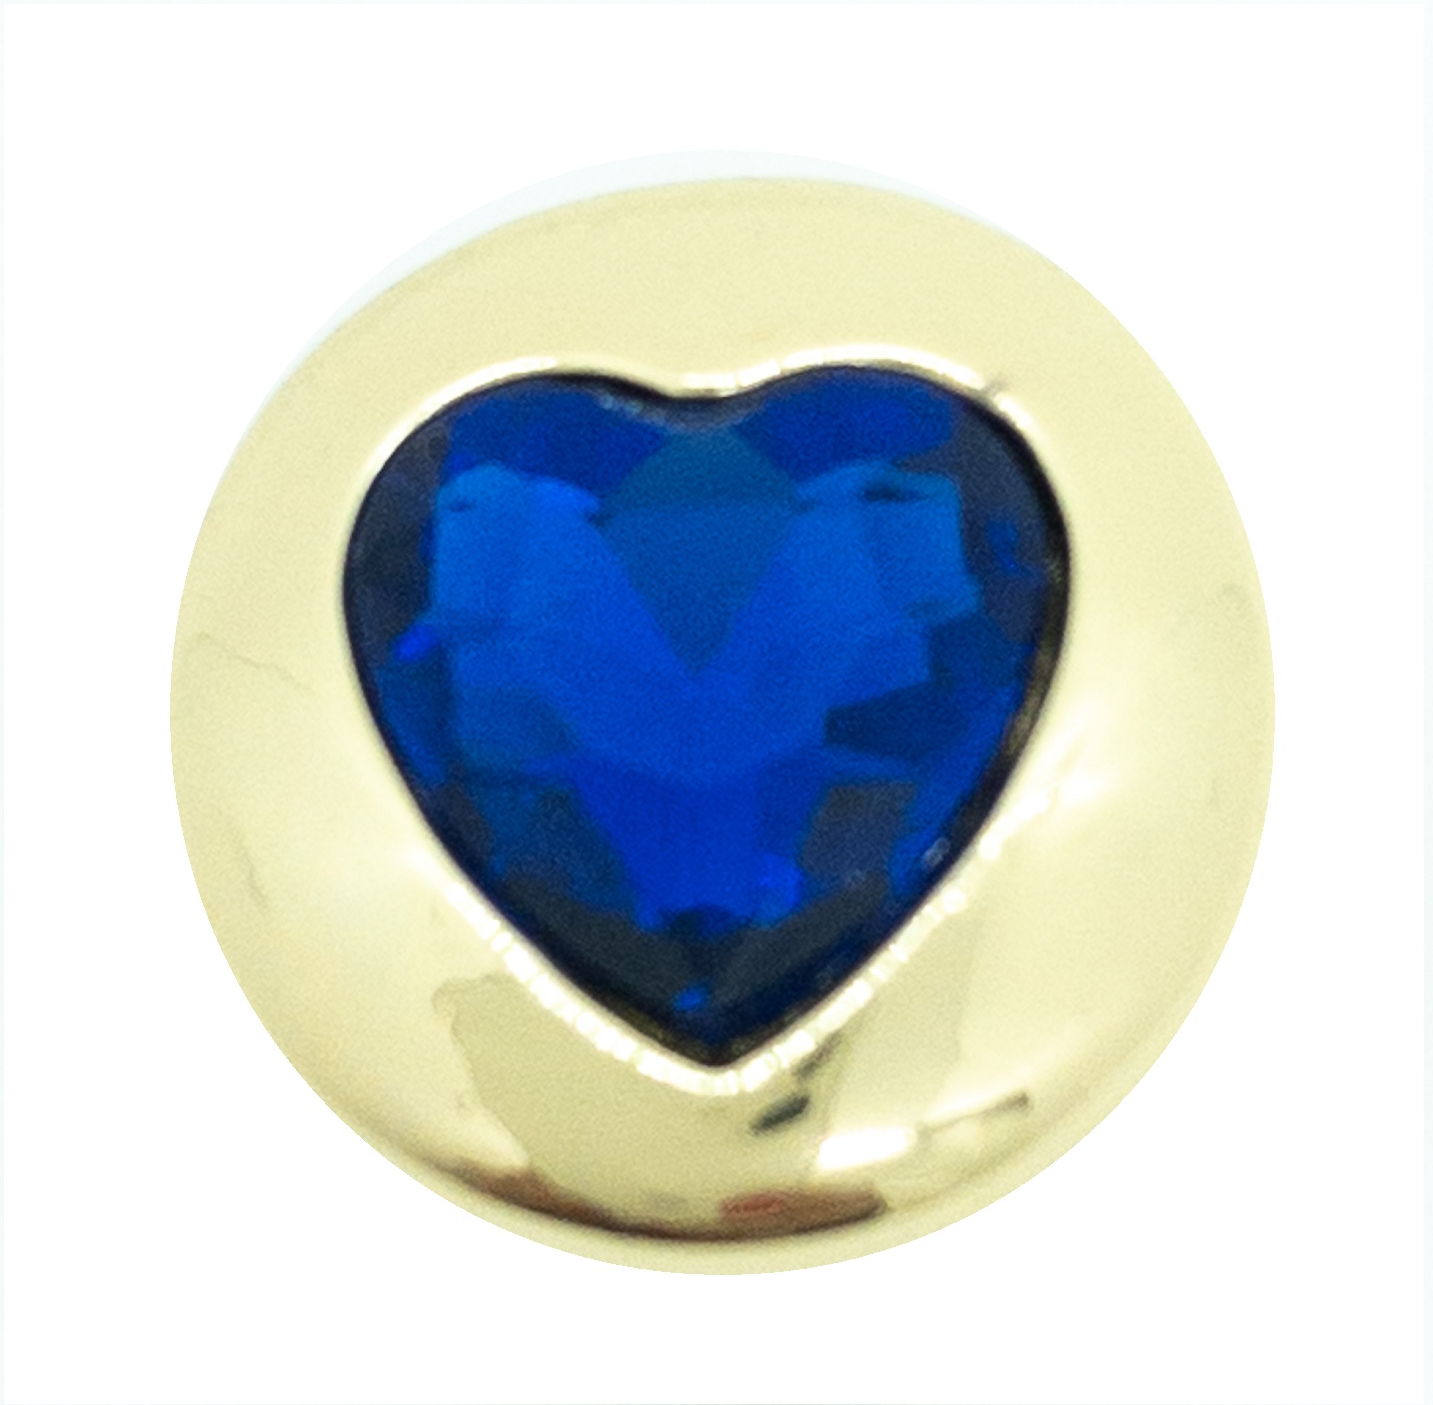 Heart - Gold with Royal Blue Heart